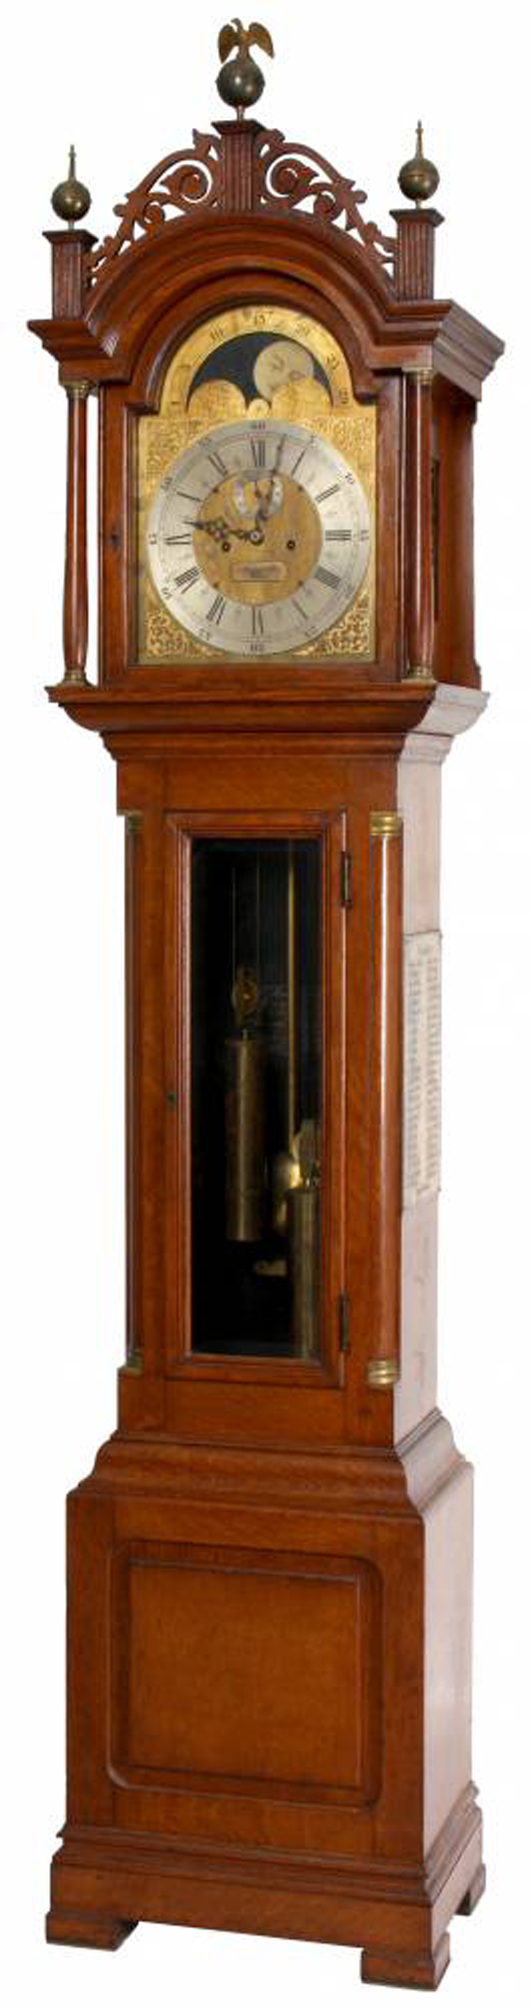 E. Howard & Co.  No. 81 oak grandfather clock , 98 inches tall (est. $8,000-$12,000). Image courtesy of Fontaine’s Auction Gallery.